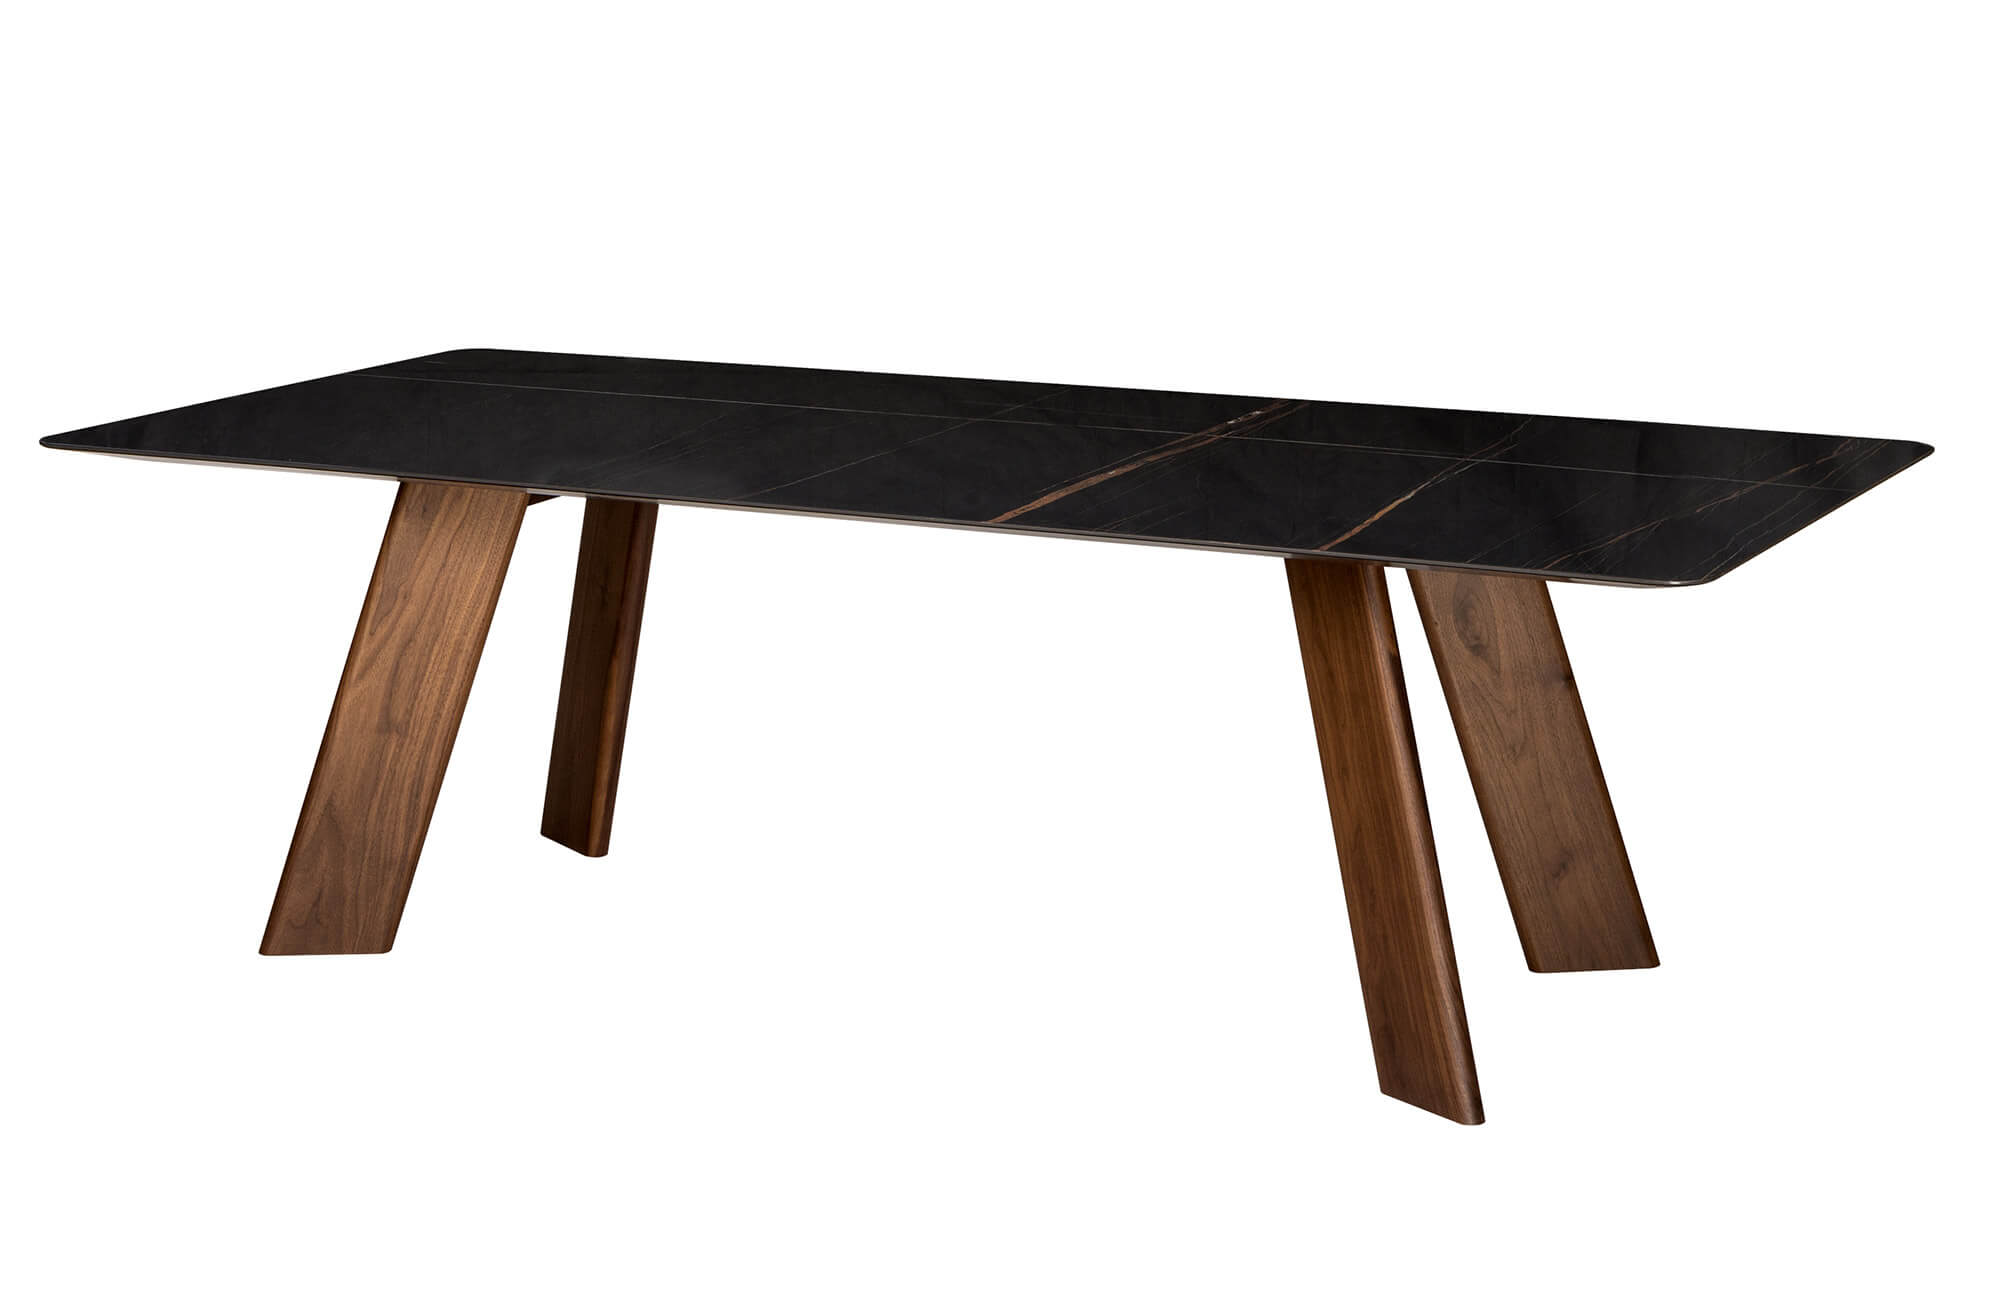 Alhambra a cer 001 dining table, with ceramic top